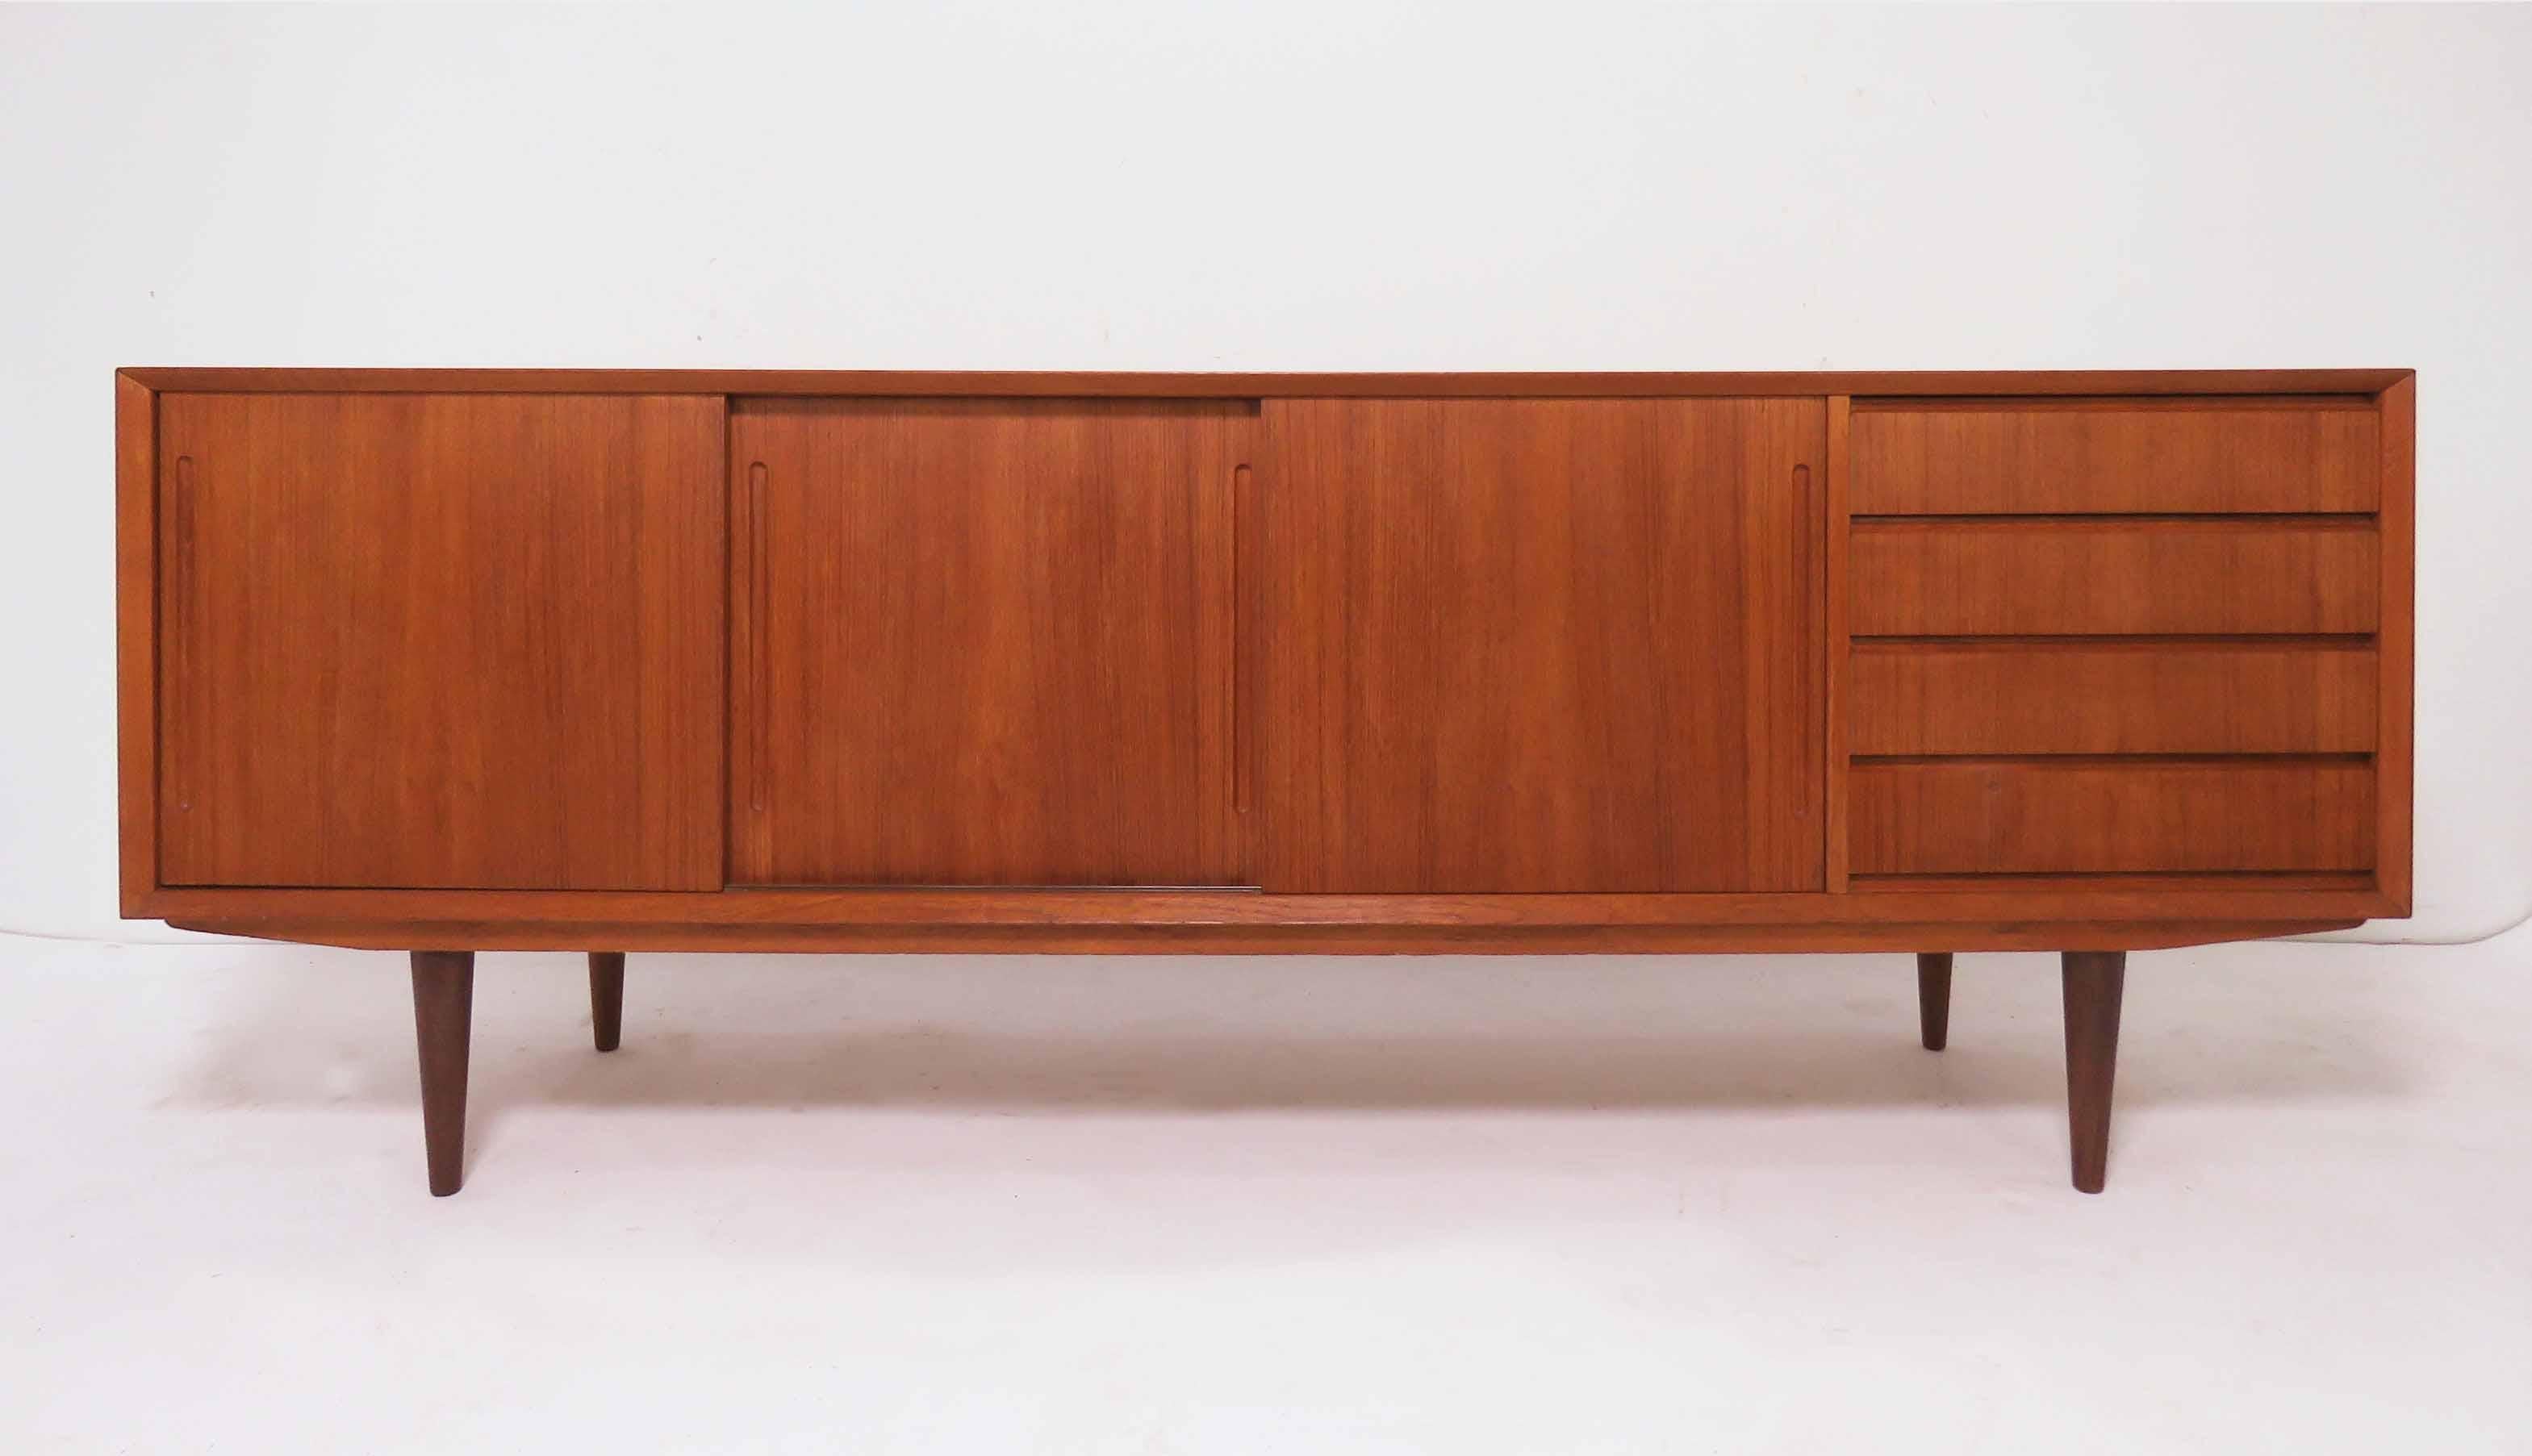 Classic teak credenza by Alderslyst Mobelfabrik, made in Denmark, circa 1960s. Book matched door and drawer fronts. Shallow drawers to the right including one felt lined for silverware storage; shelving storage behind the sliding doors to the left.